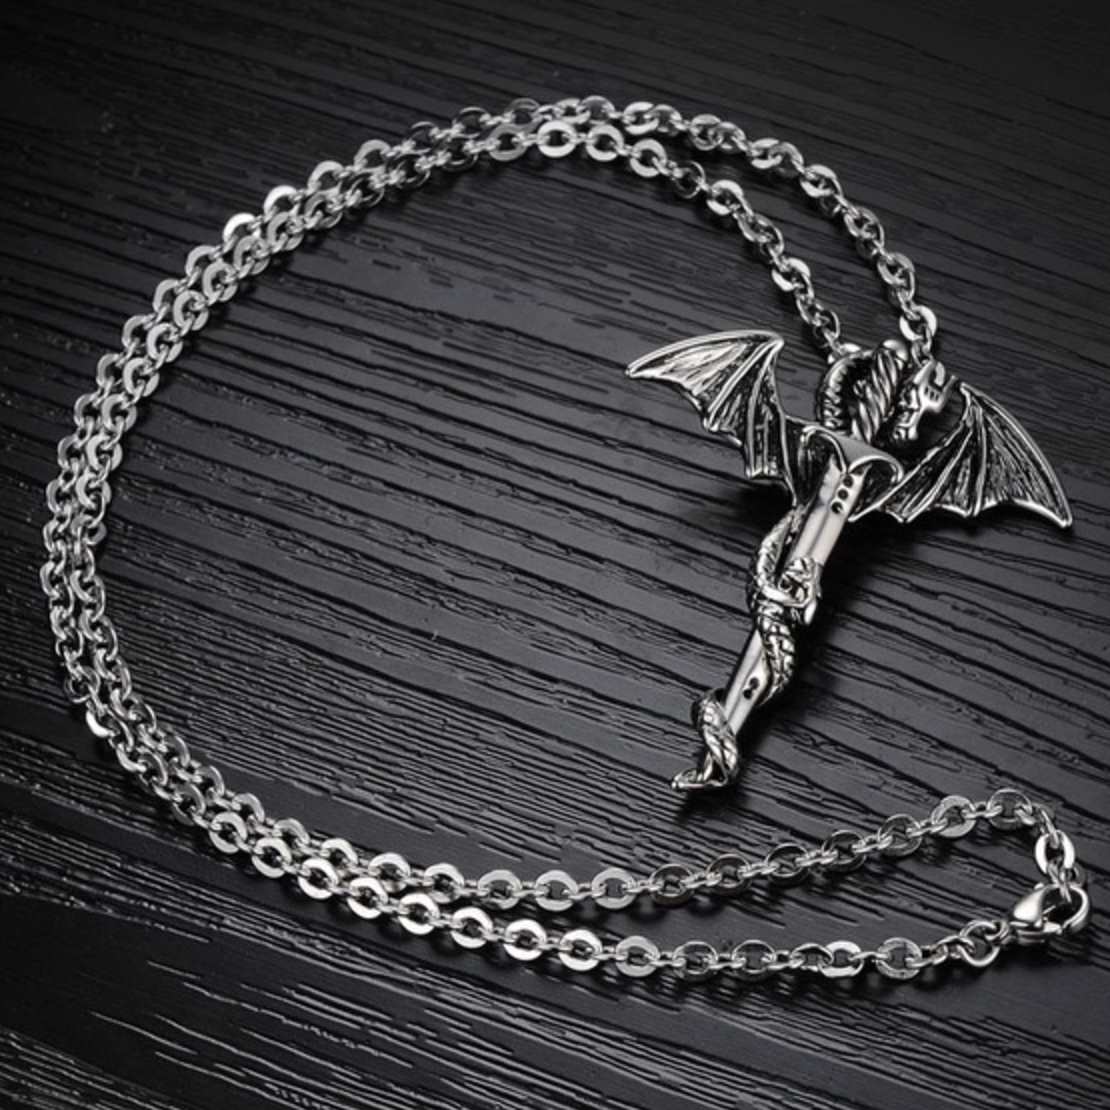 Dragon and Sword Necklace - Silver